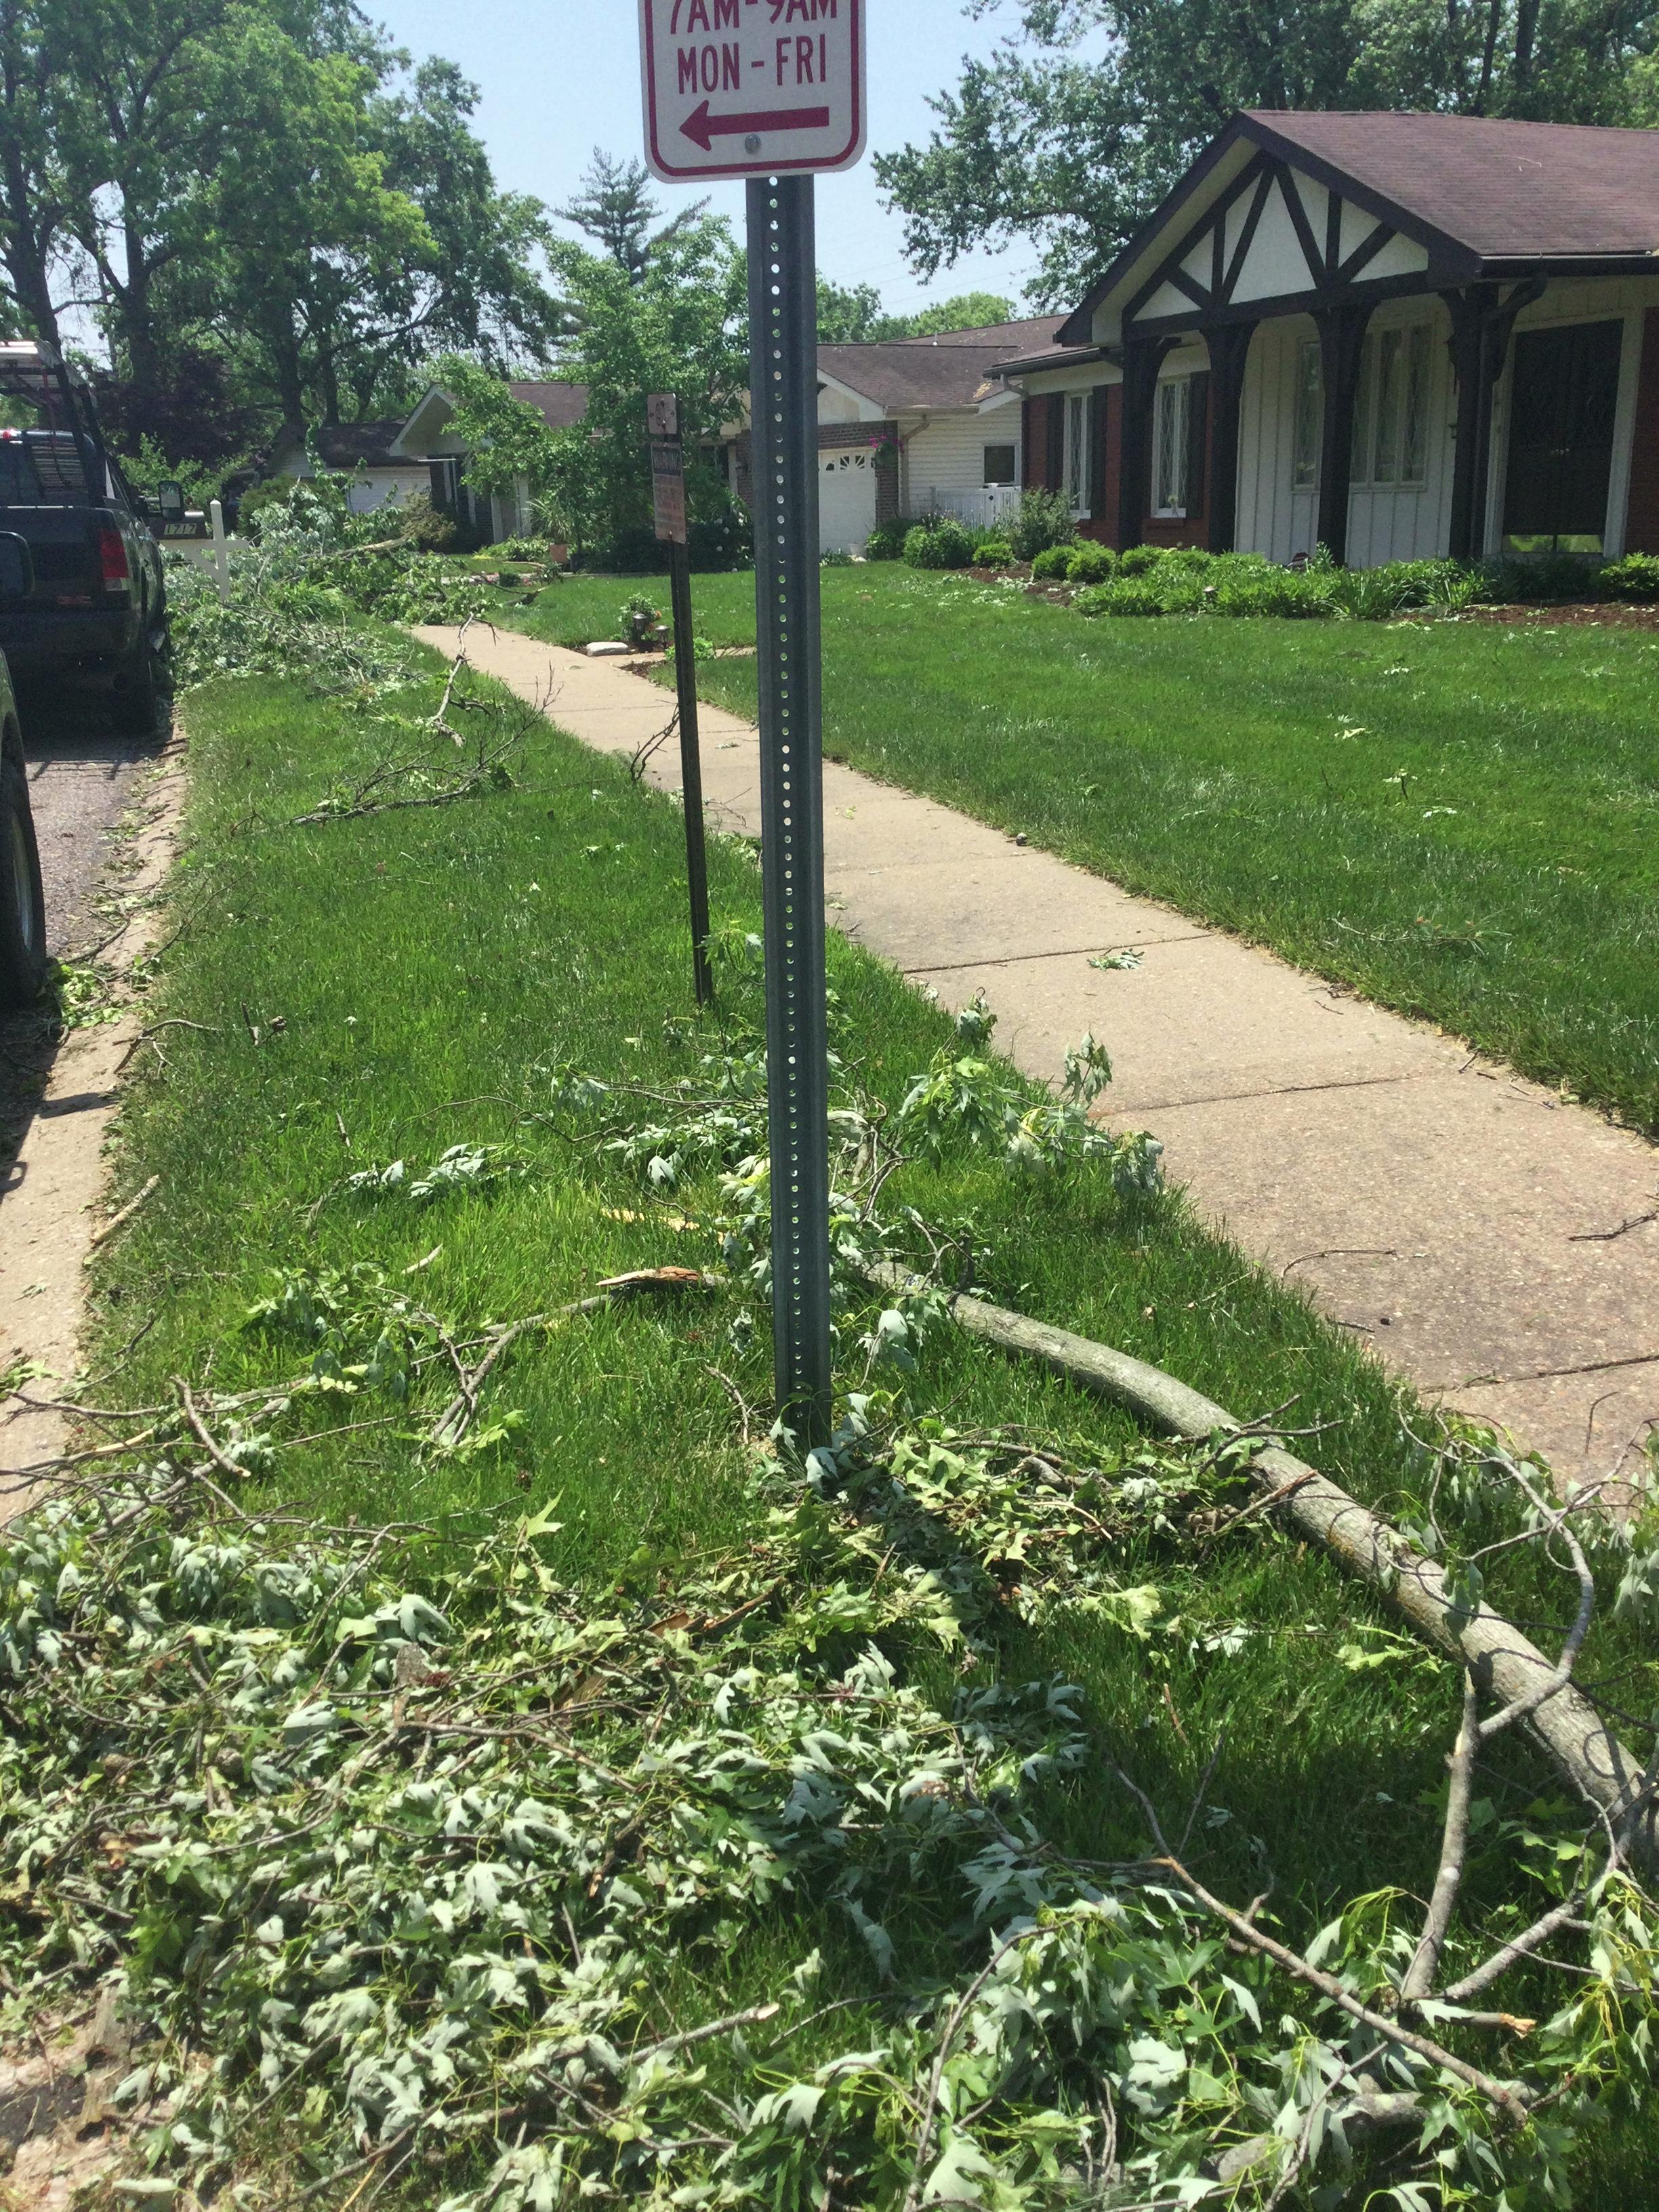 Several branches down along Seven Pines Drive in Creve Coeur near the end of the tornado track.